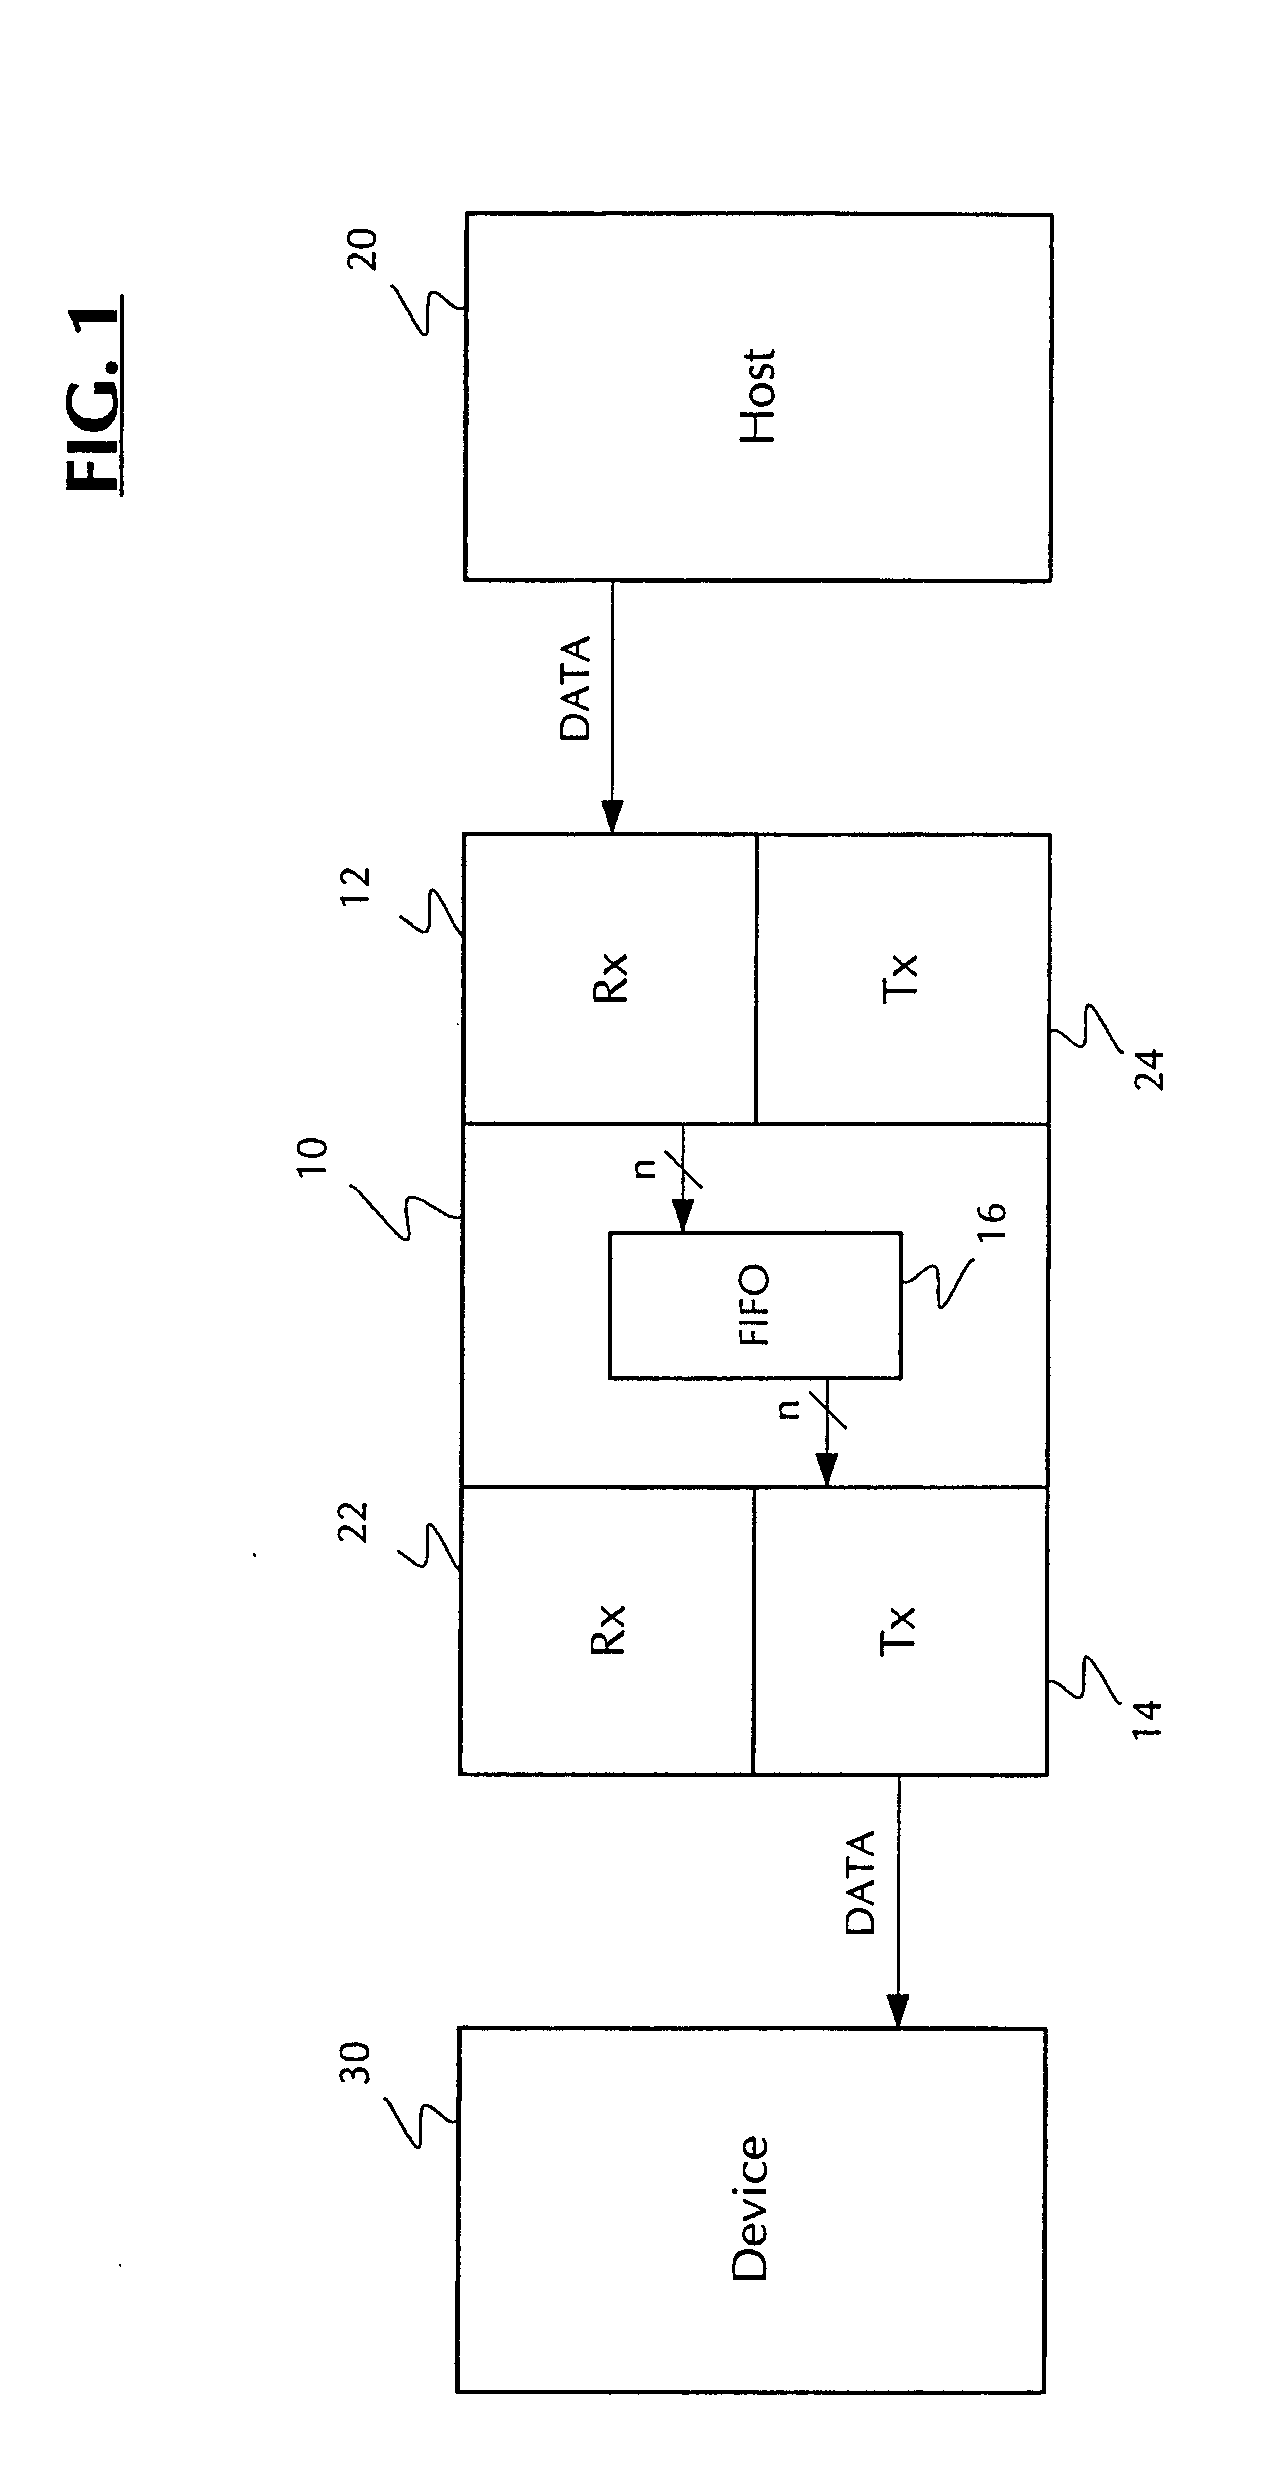 Architectures, circuits, systems and methods for reducing latency in data communications